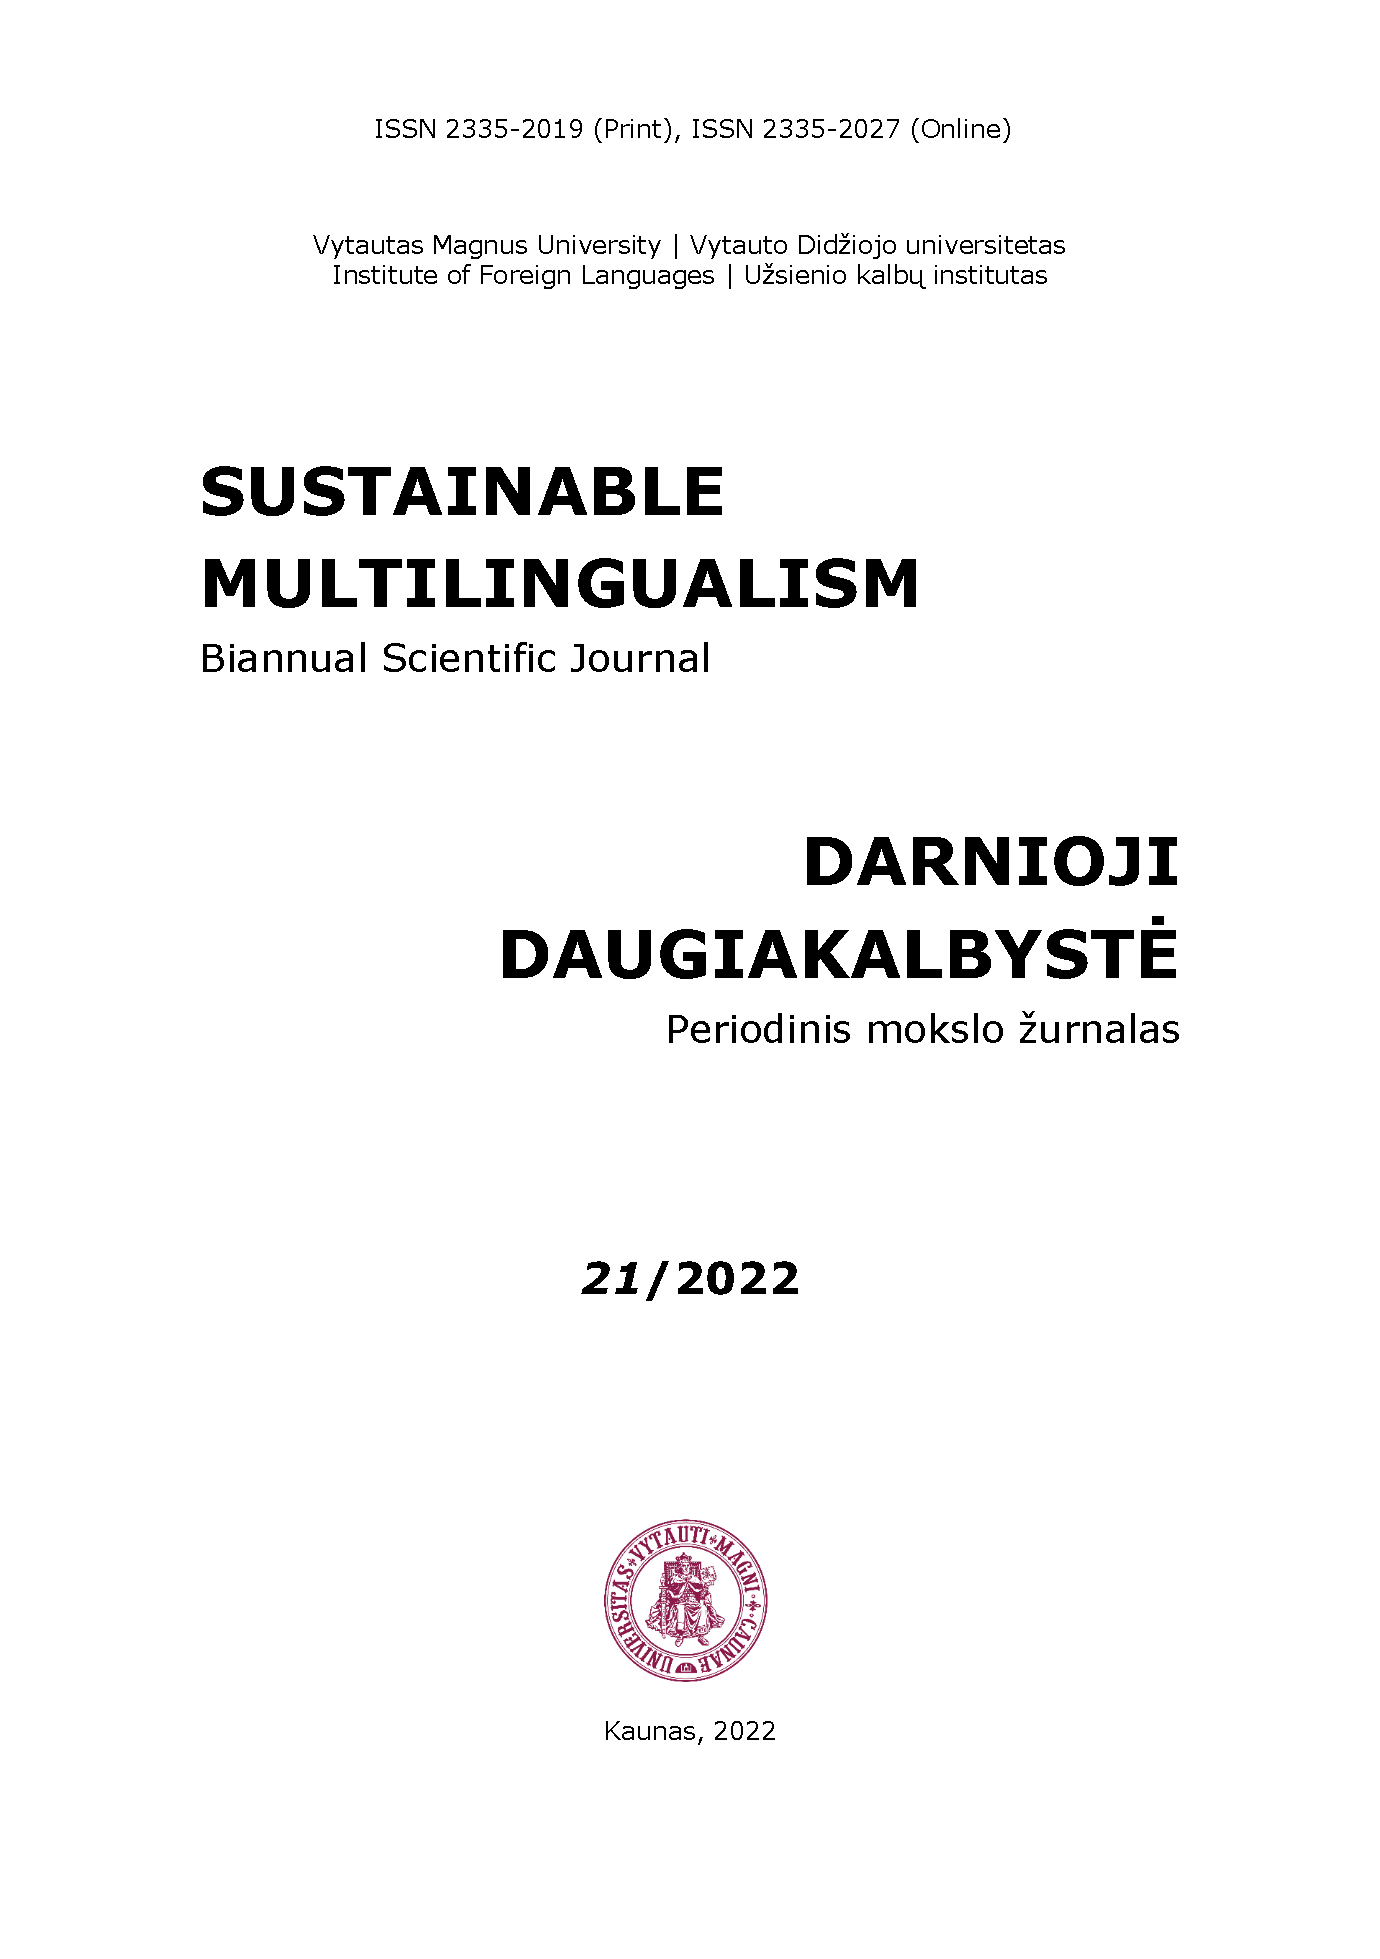 In-service Primary Teachers' Practices and Beliefs about Multilingualism: Linguistically Sensitive Teaching in the Basque Autonomous Community